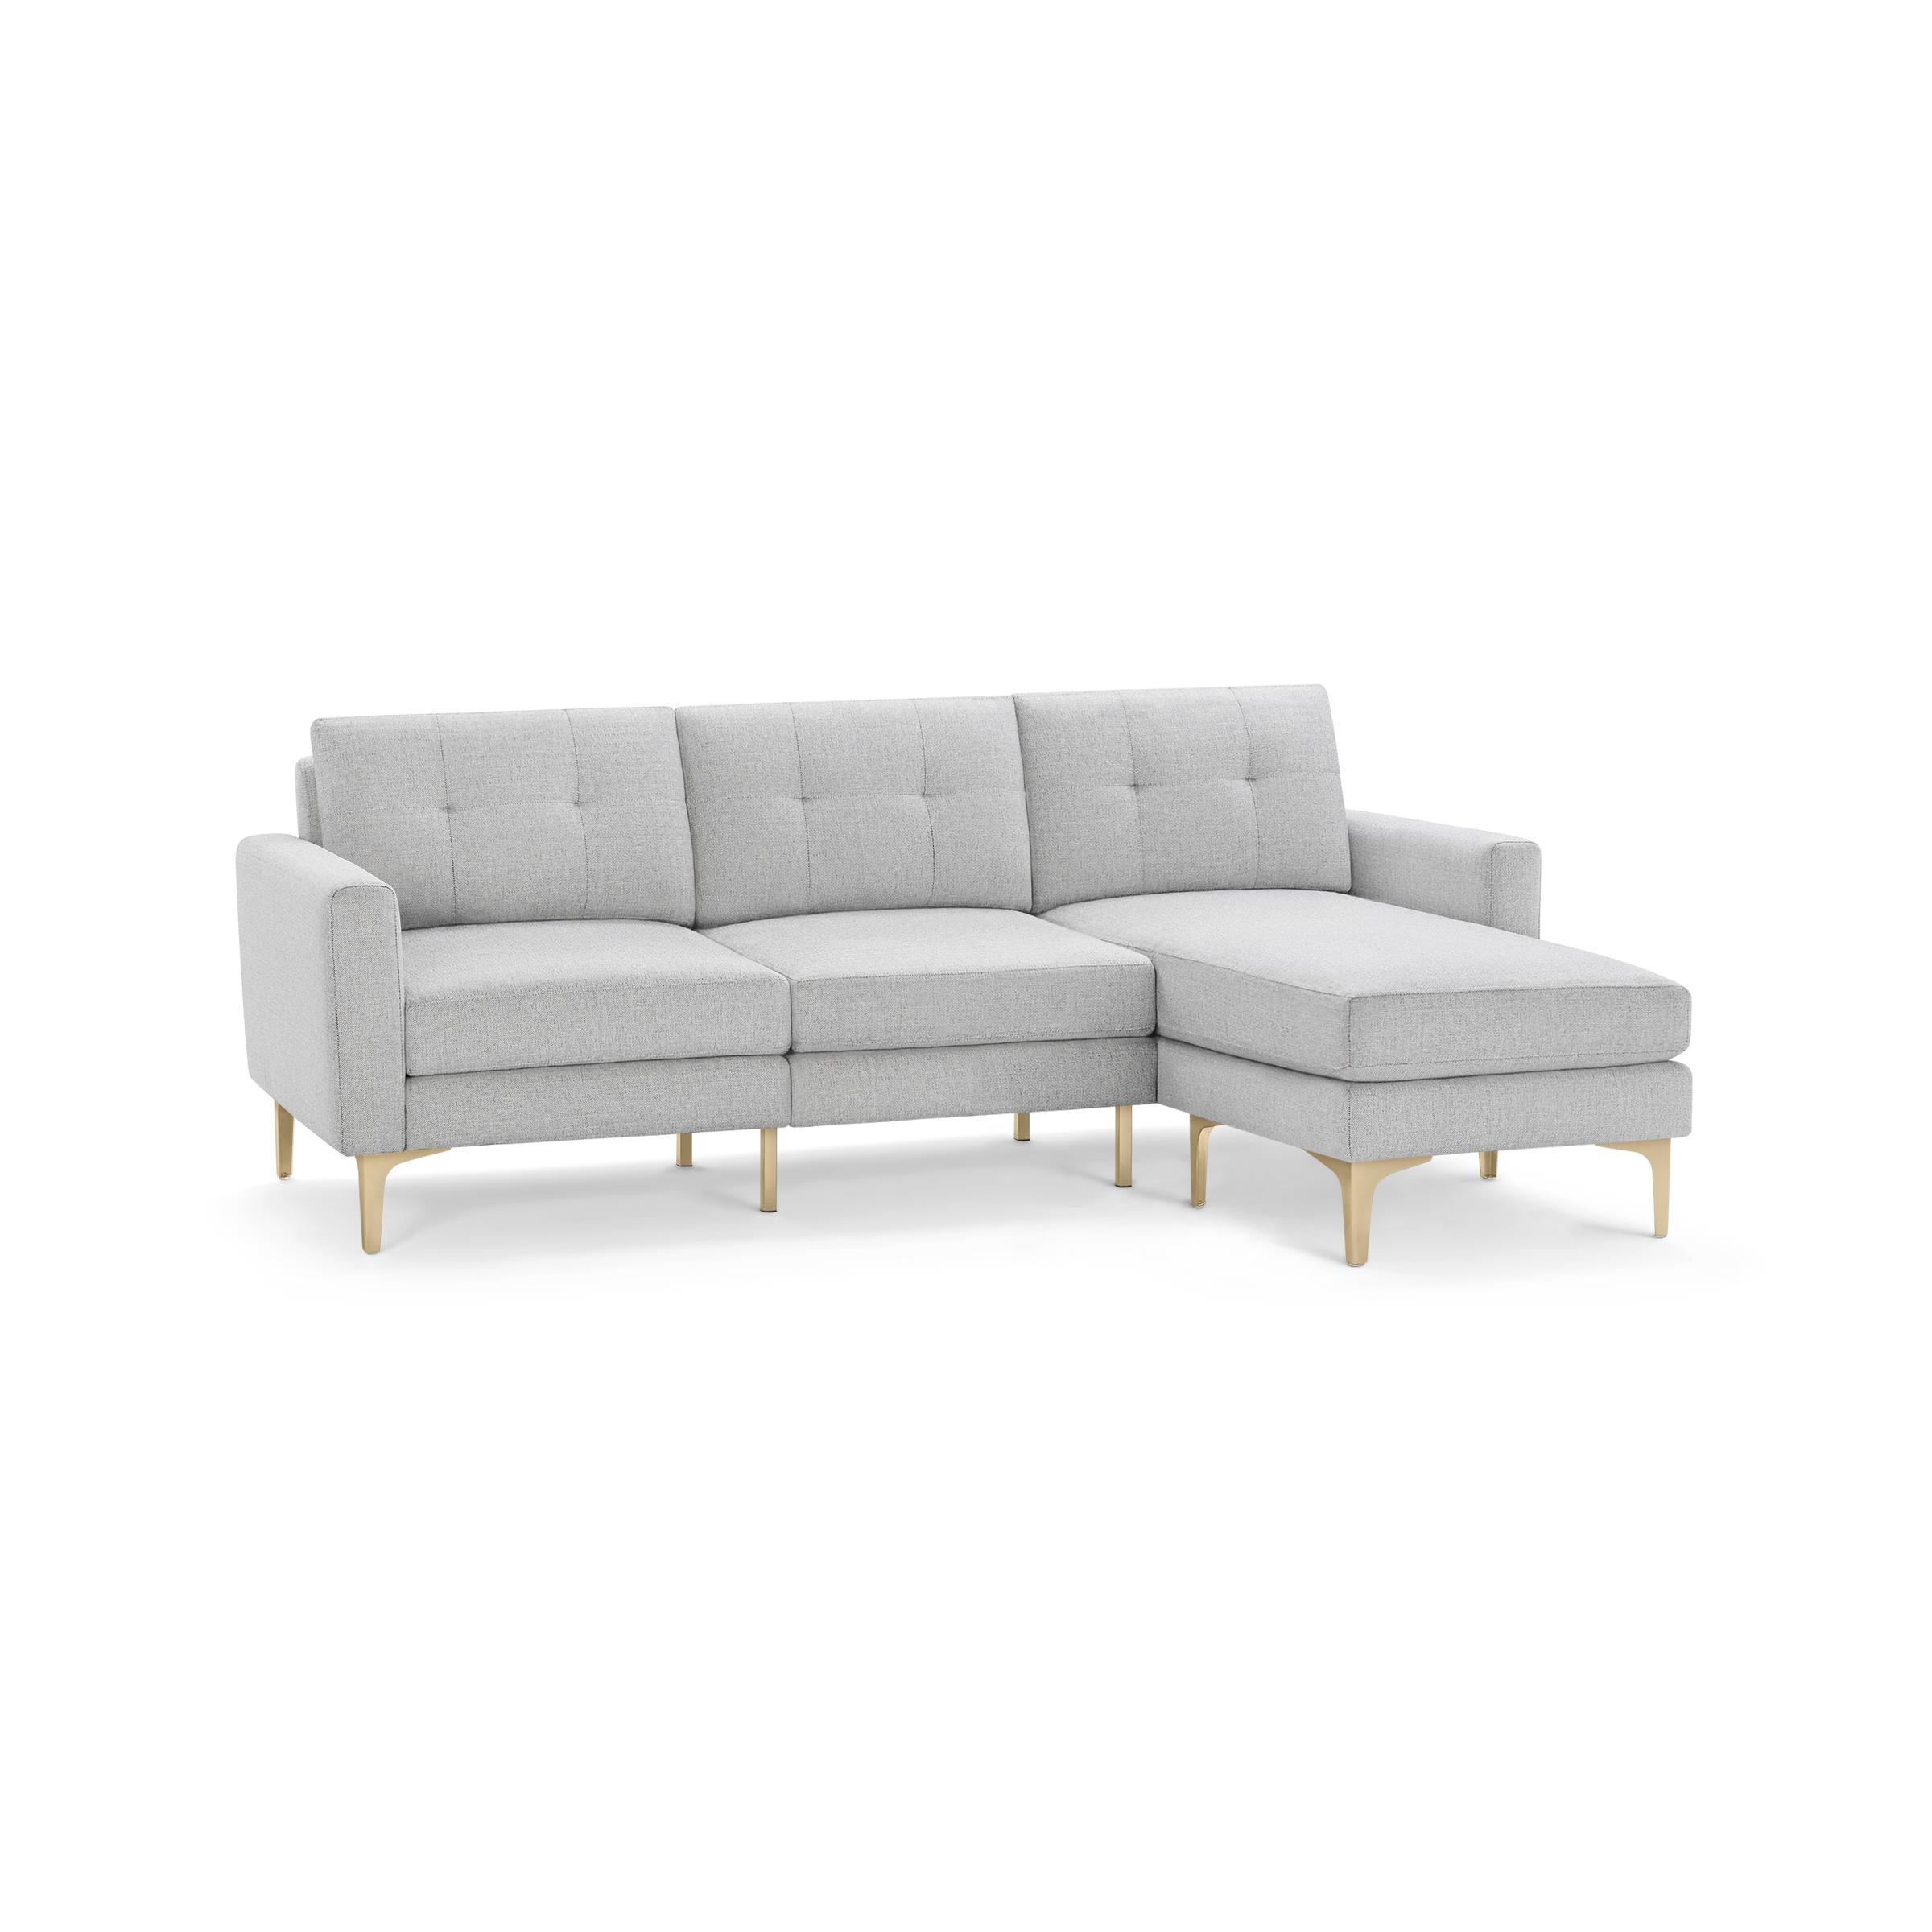 Nomad Sofa Sectional in Crushed Gravel, Brass Legs - Image 0